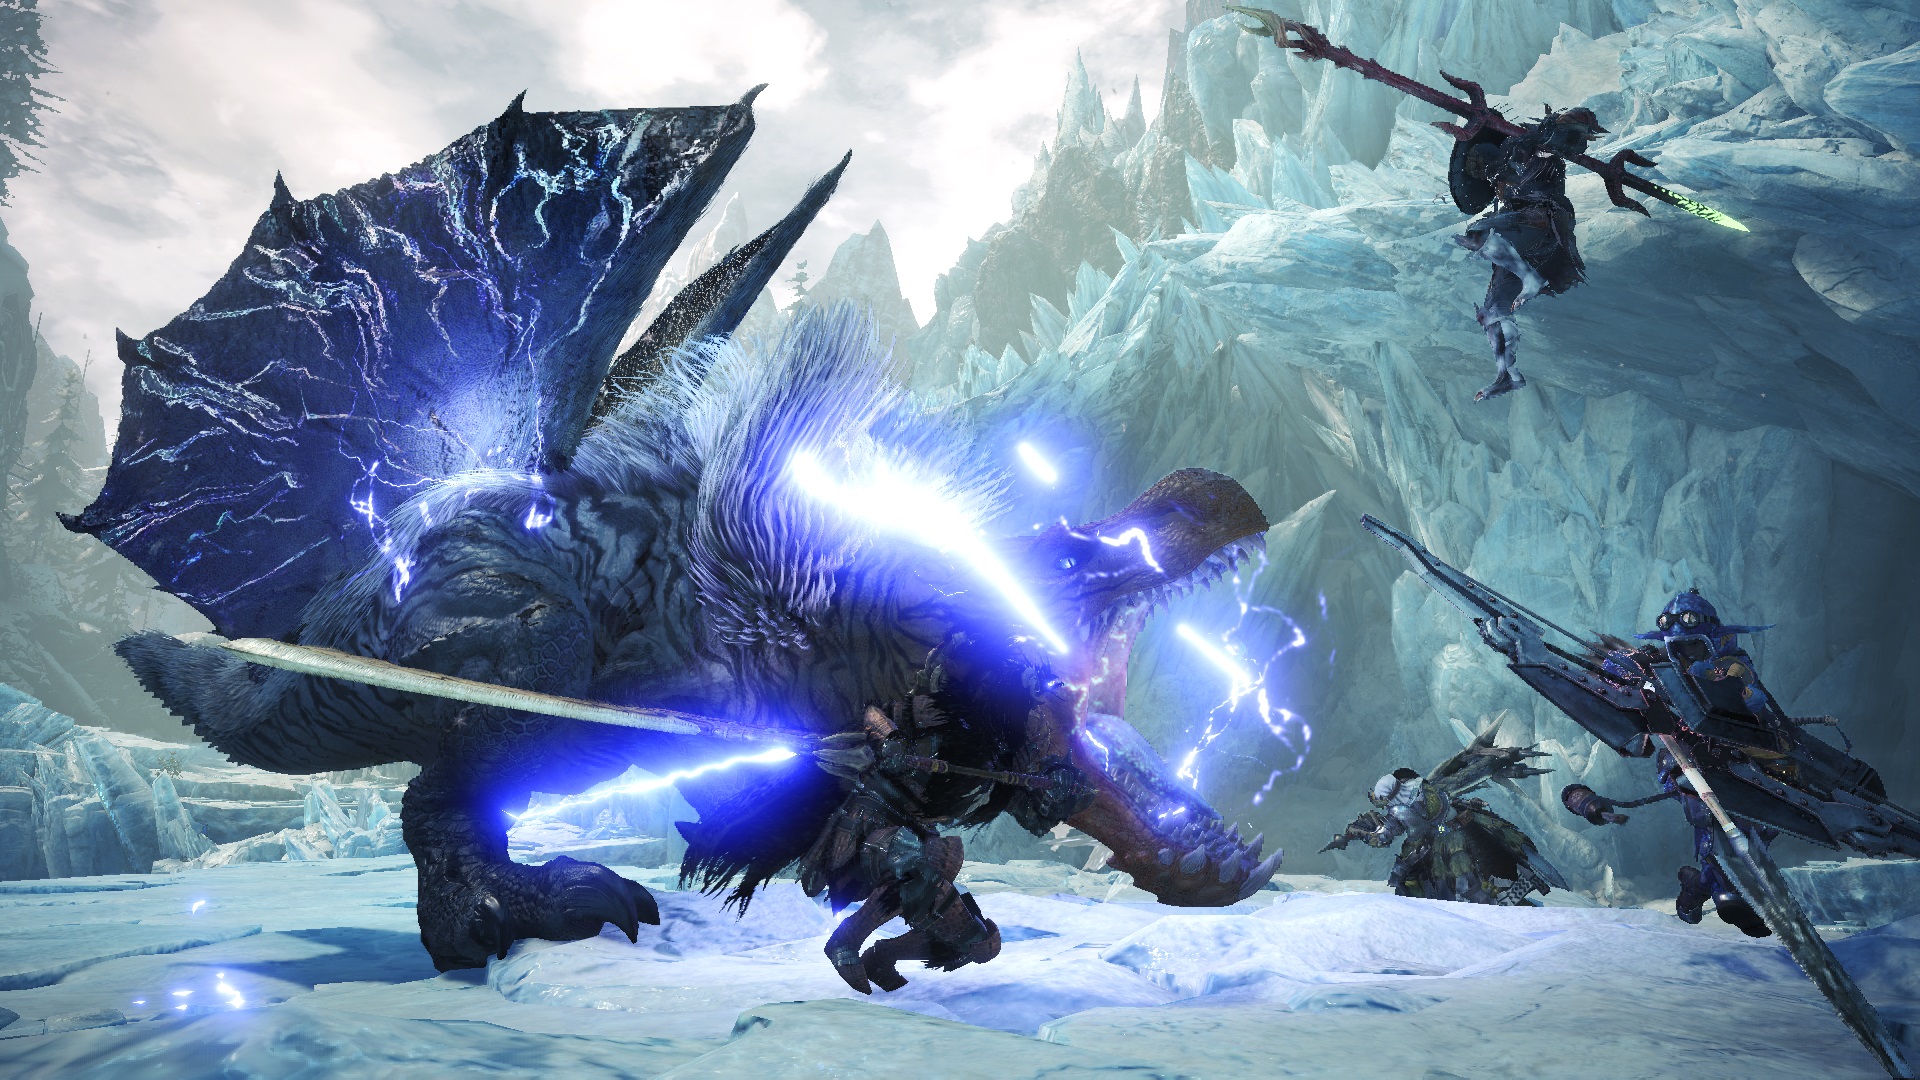 List of the best and craziest Monster Hunter World: Iceborne PC mods